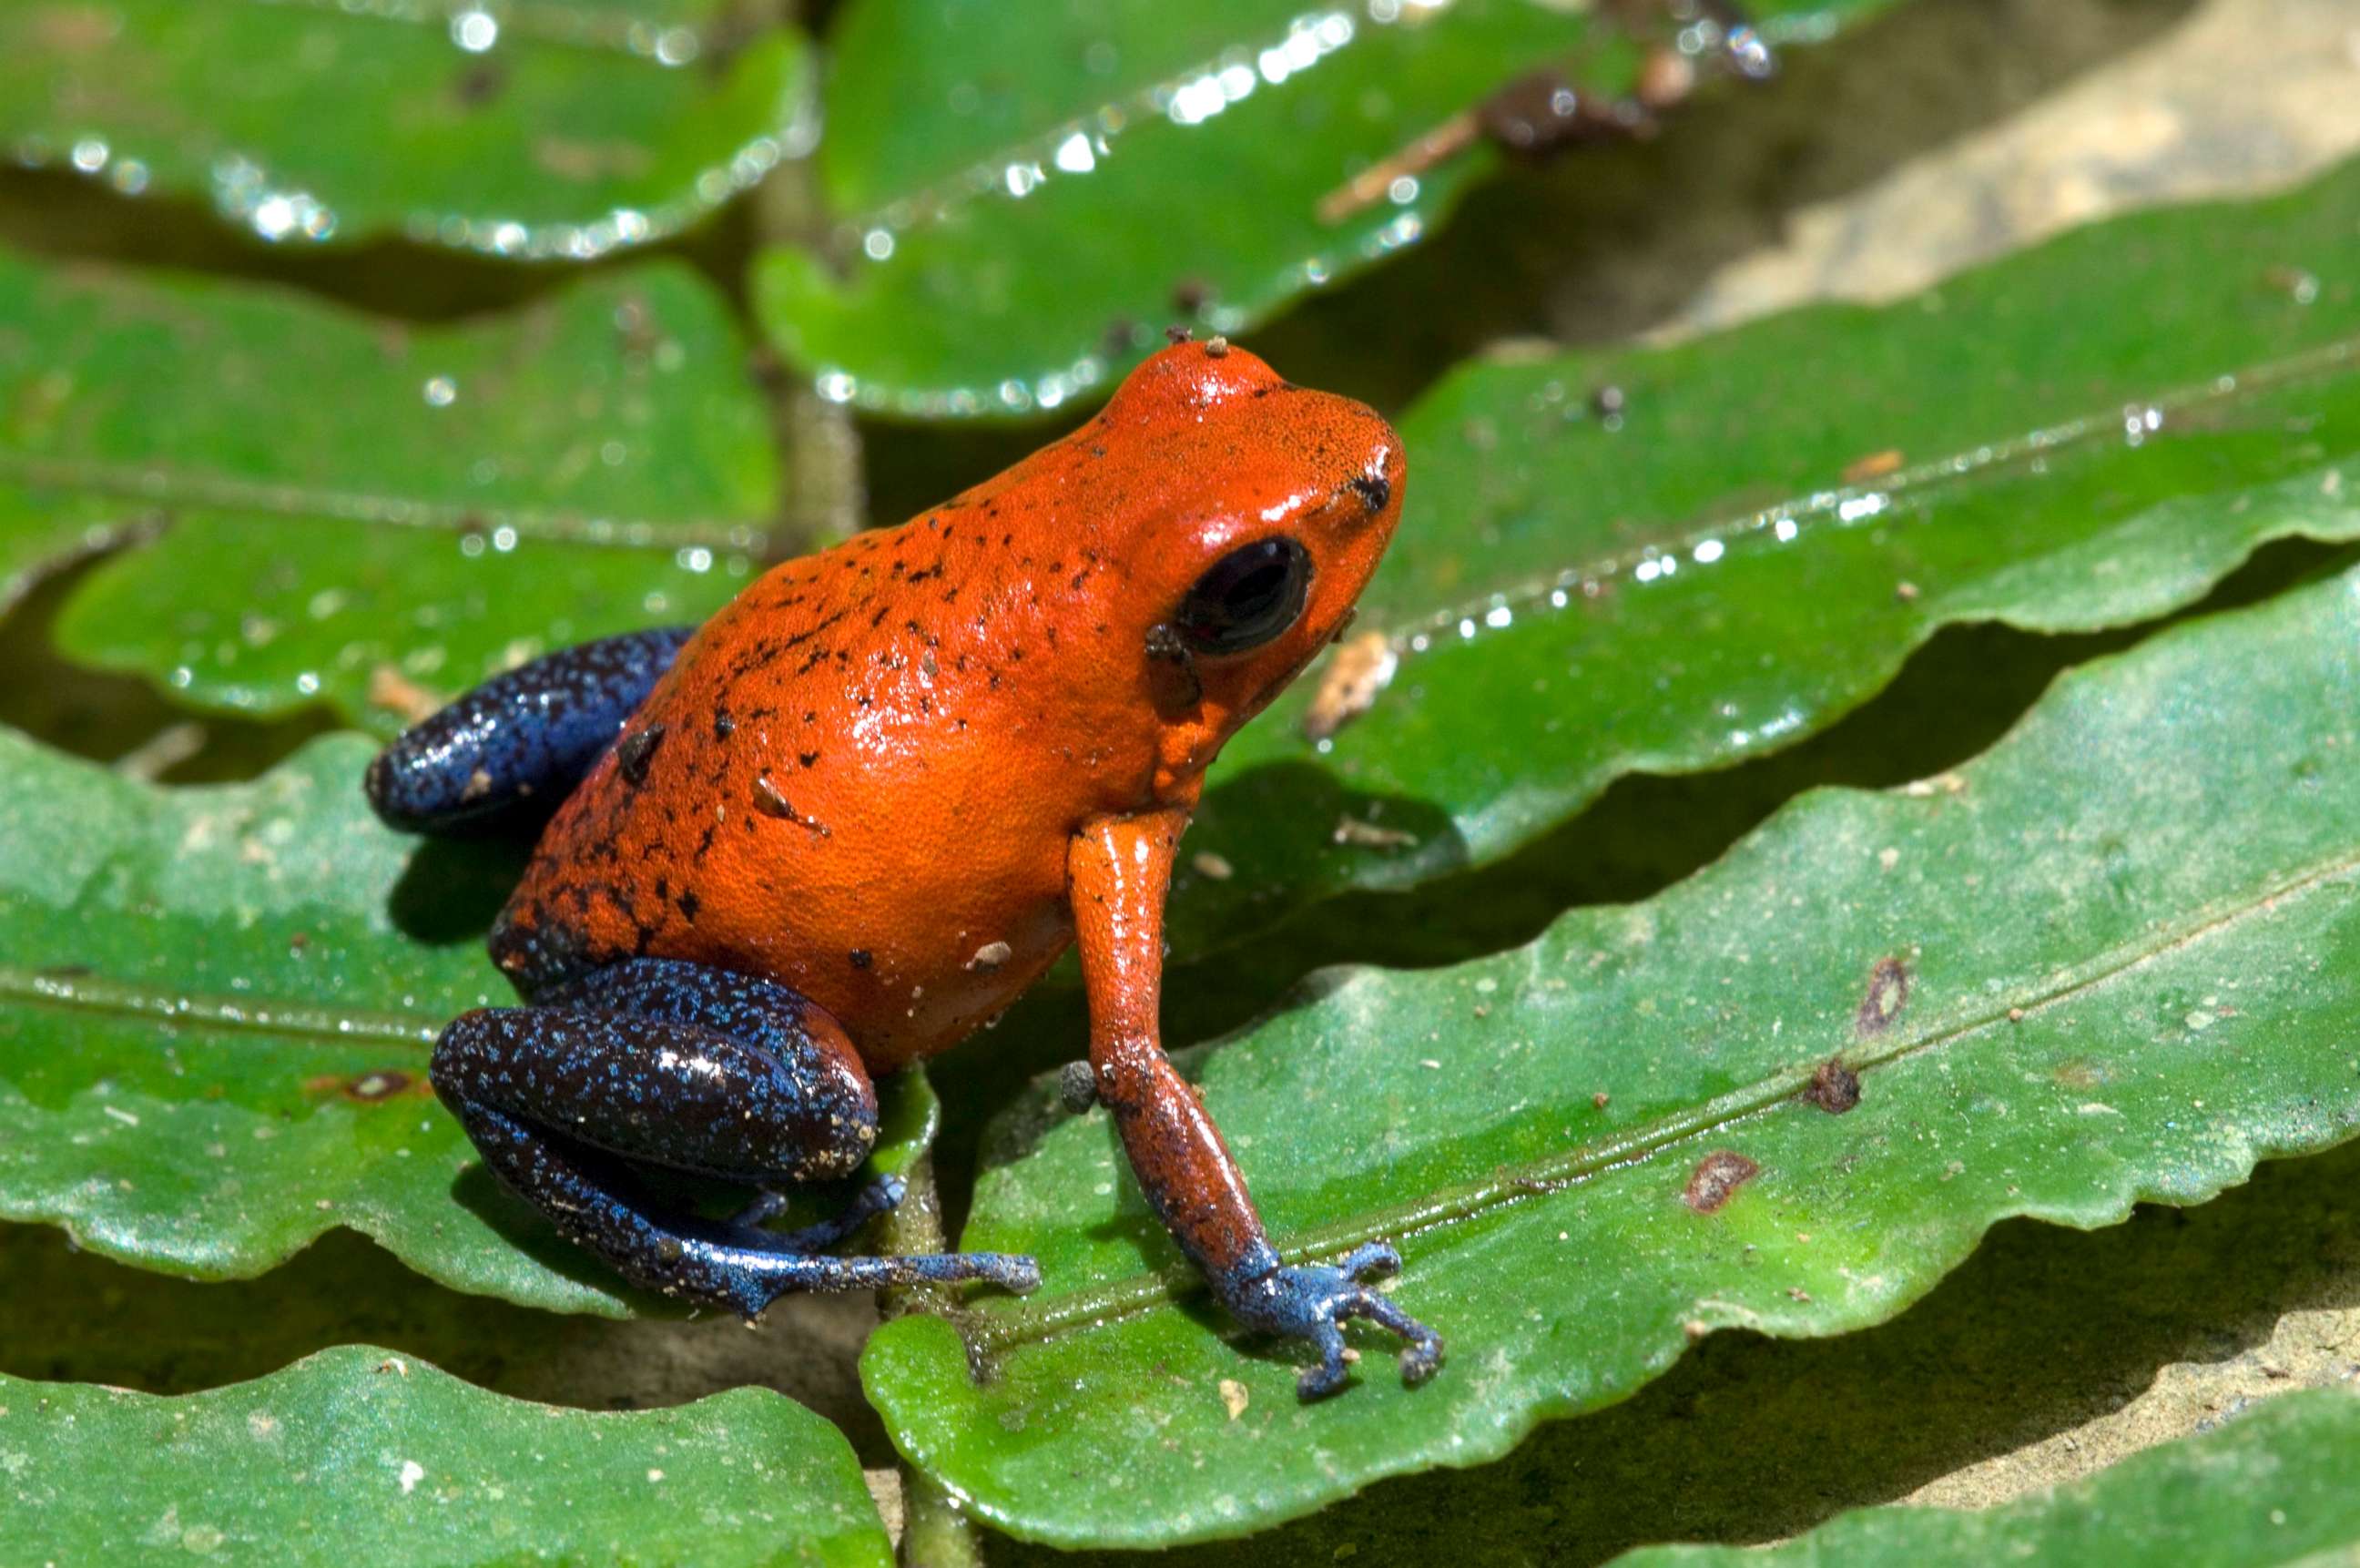 Strawberry poison frogs are reaching their heat limit because of